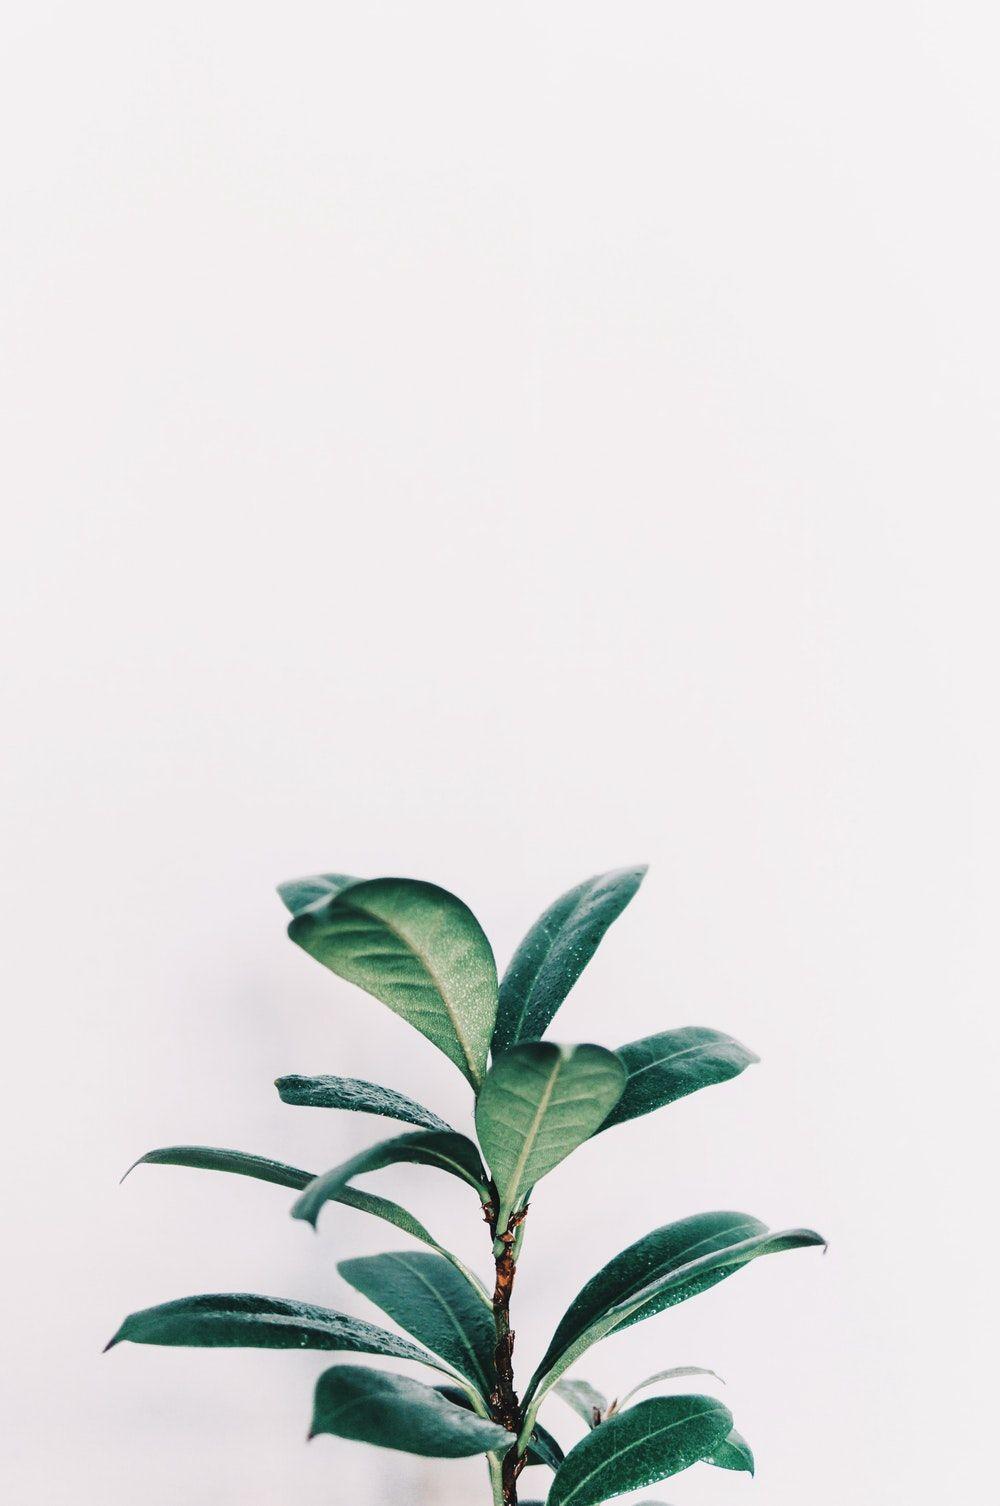 Plant Aesthetic Laptop Wallpapers - Top Free Plant ...